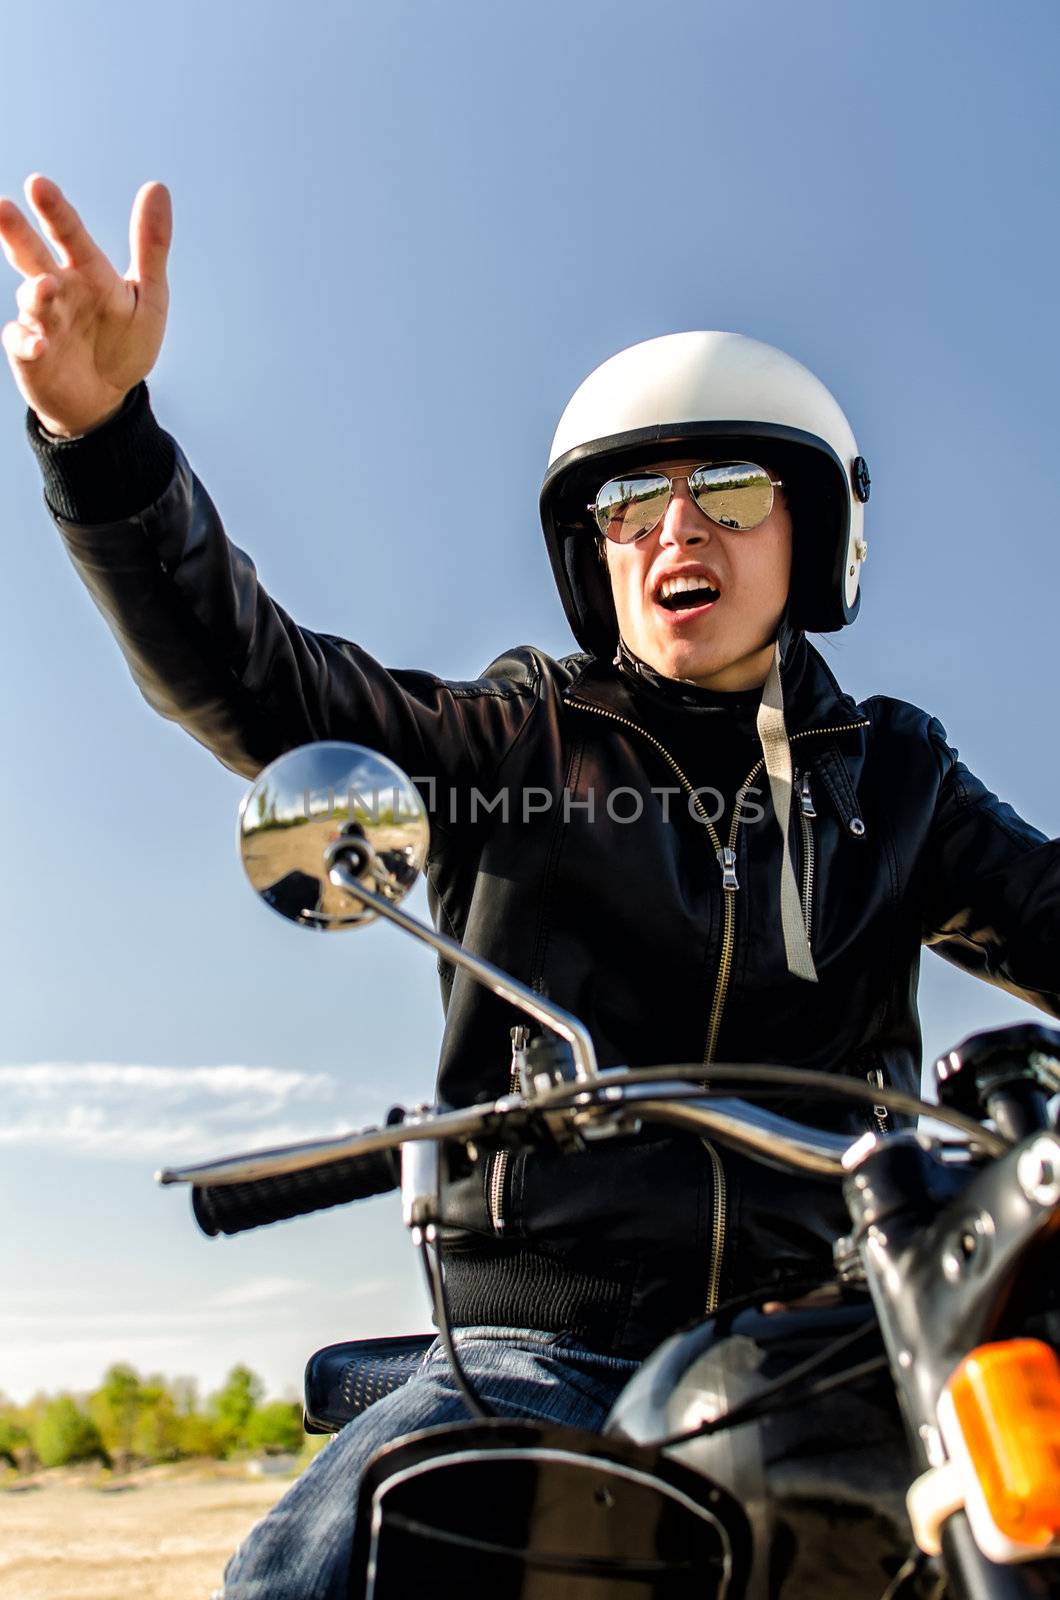 Motorcycle cop in a helmet and goggles